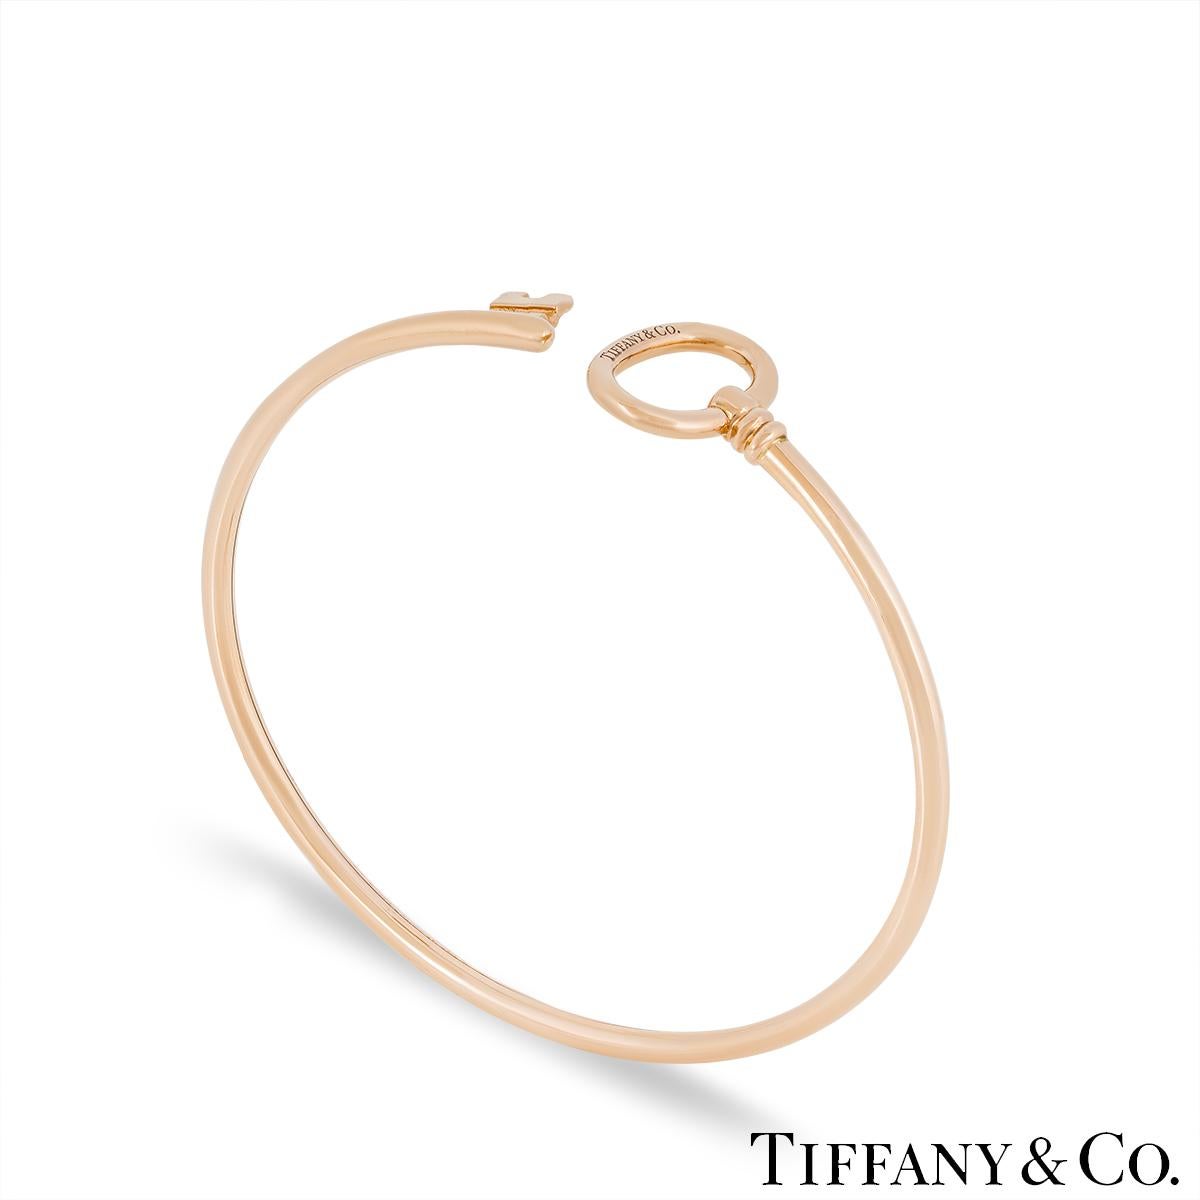 A chic 18k rose gold wire bracelet by Tiffany & Co. from the Tiffany Keys collection. The cuff style bracelet features a key design that wraps around the wrist. It measures 2.4mm wide, is a size medium that fits a wrist size up to 6.25 inches and